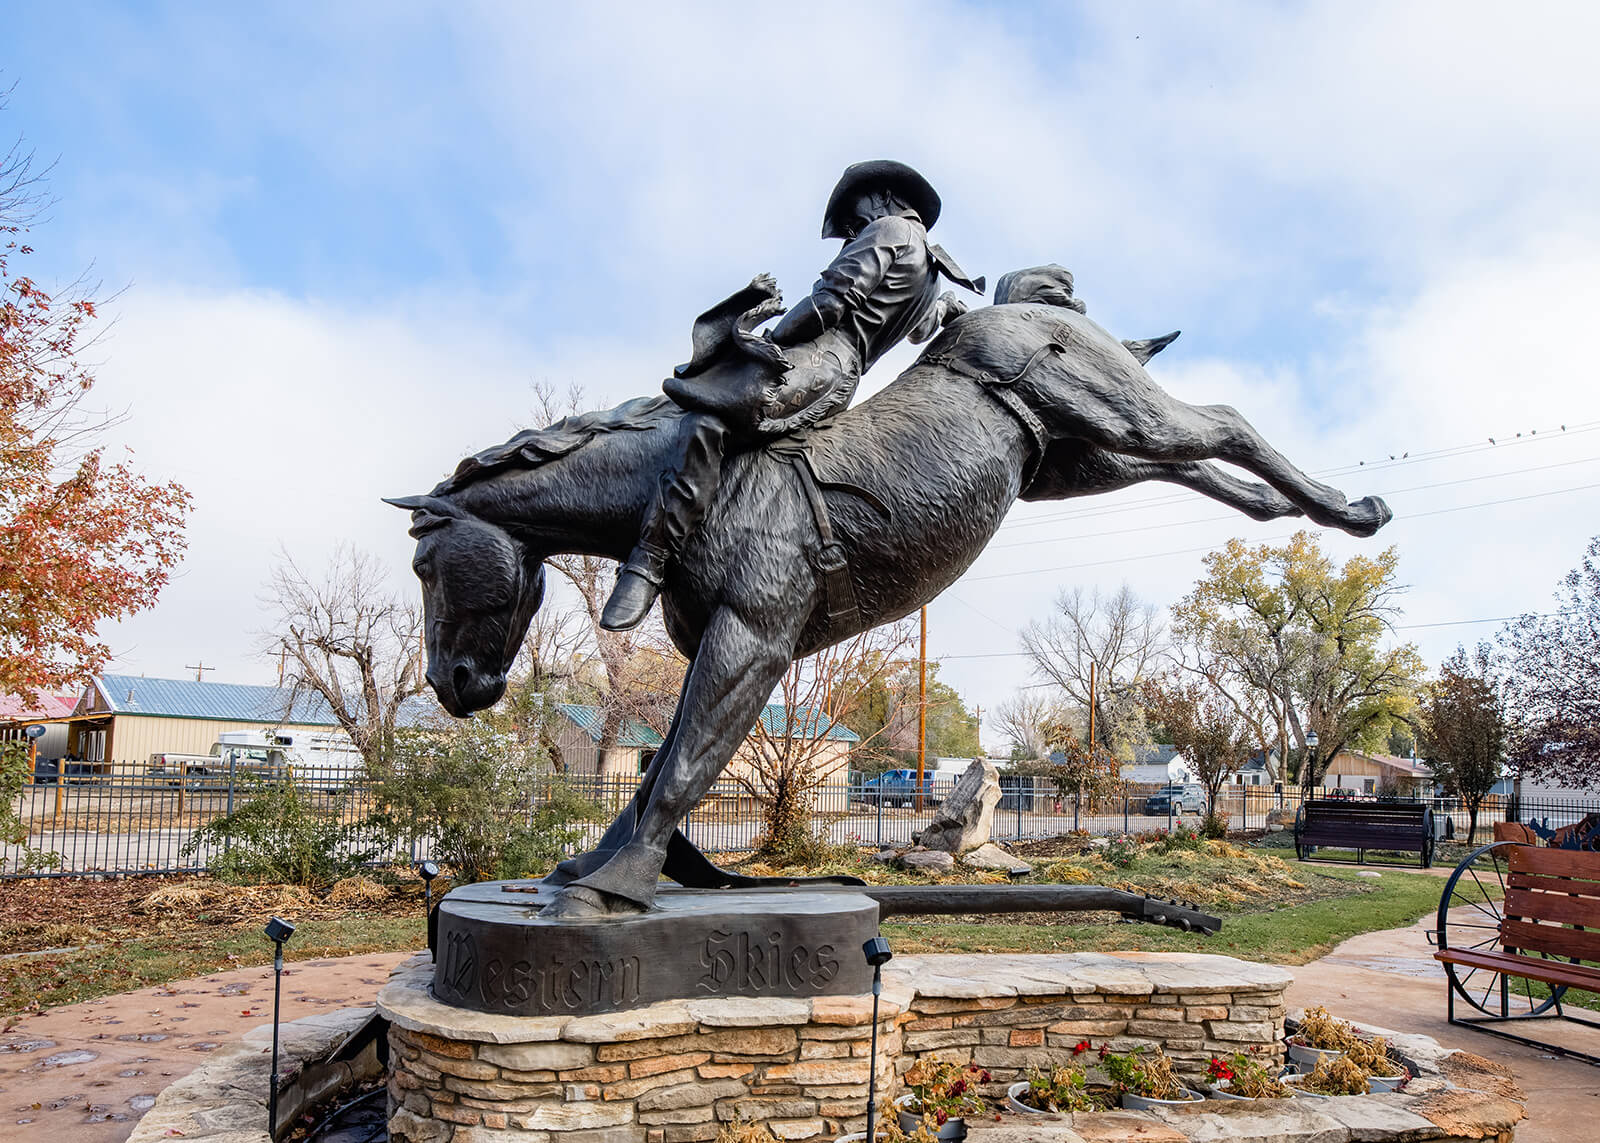 The Chris LeDoux Monument in Kaycee, WY